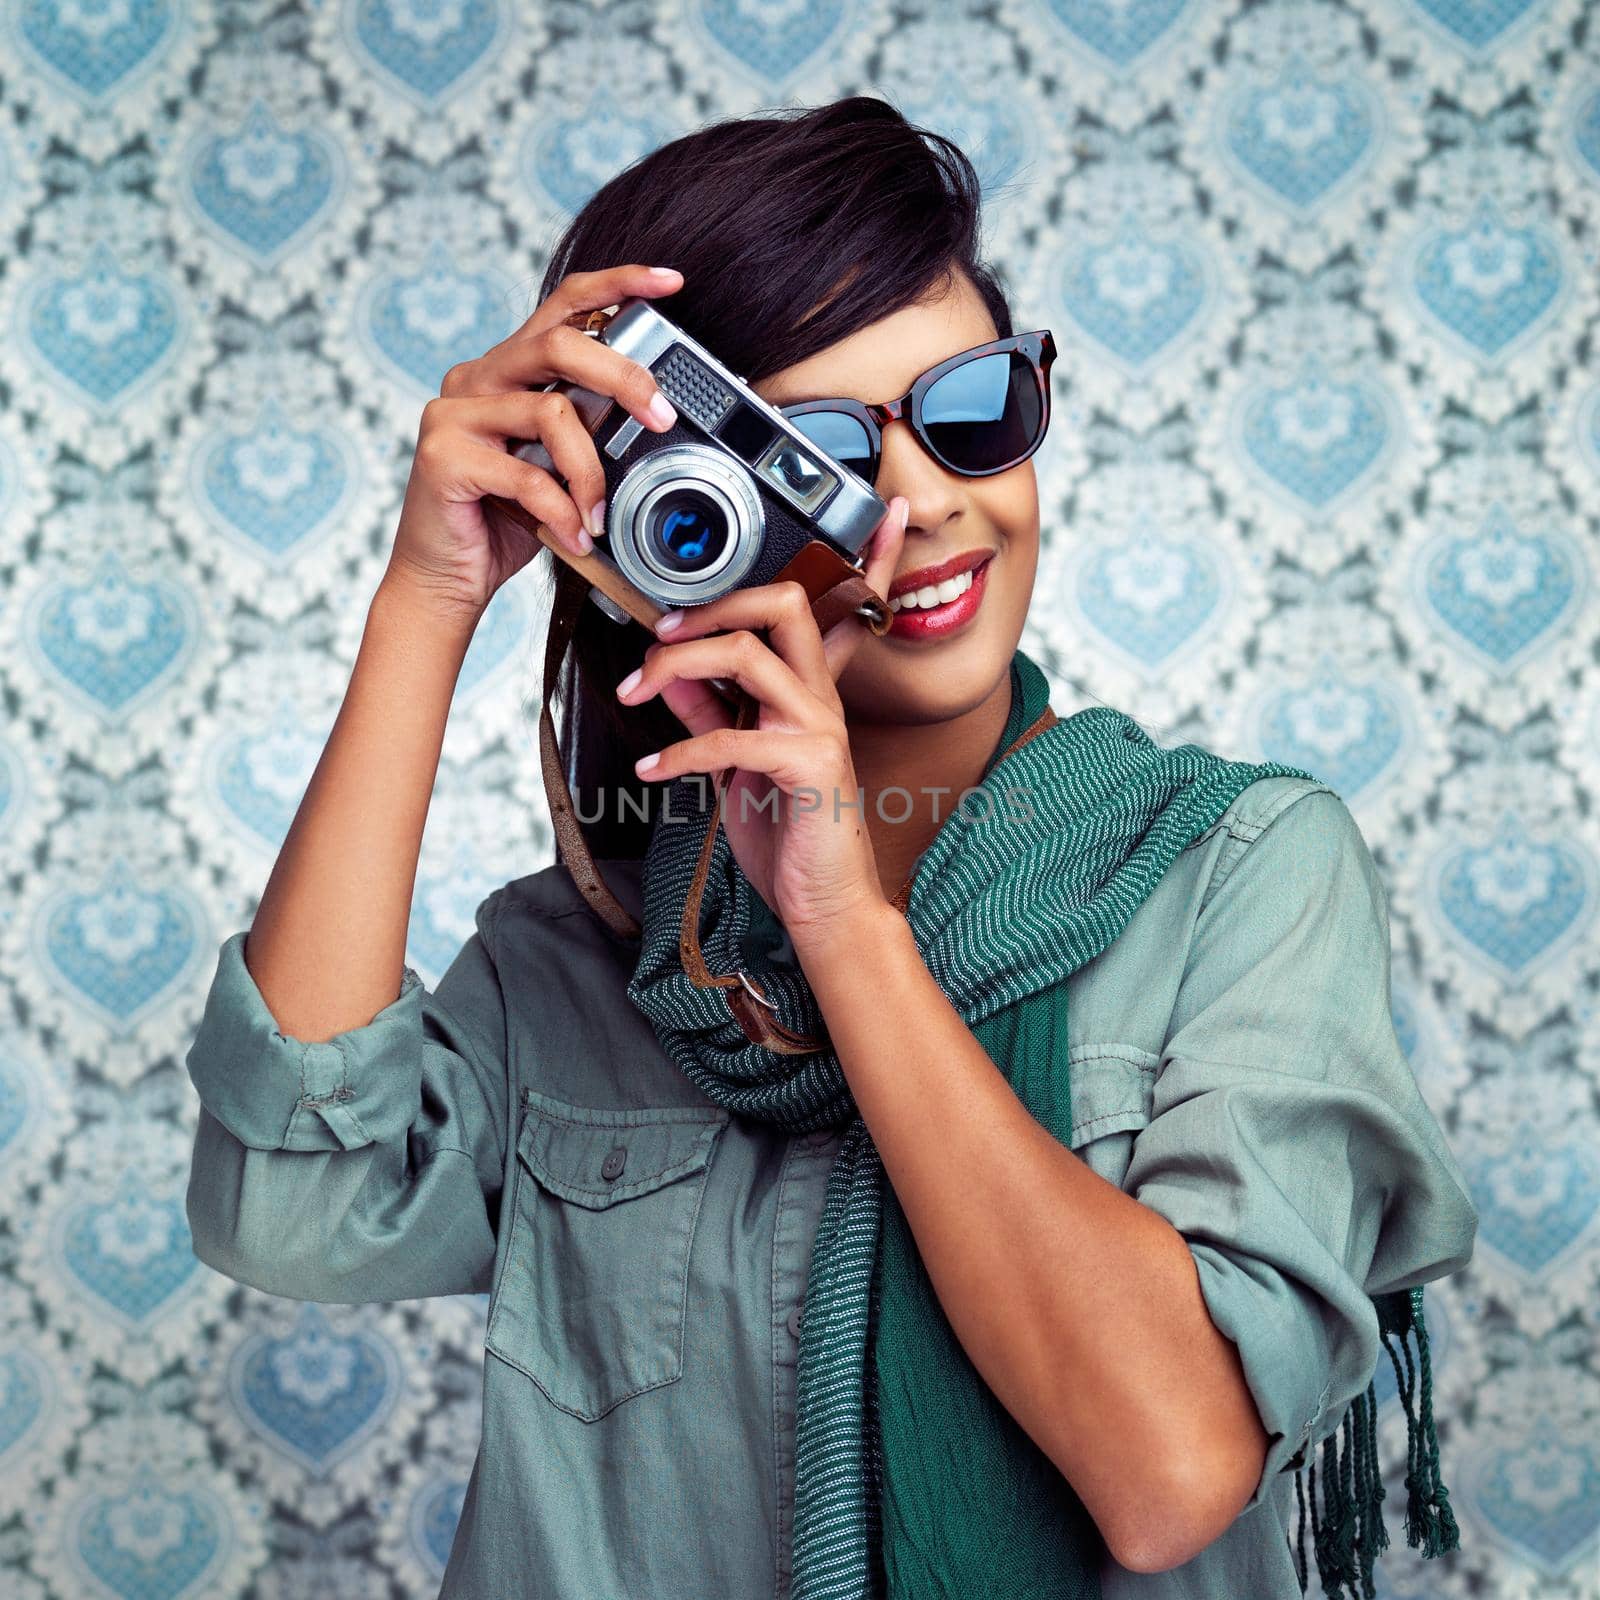 Smile for the camera. Shot of a young woman posing with a camera over a patterned background. by YuriArcurs